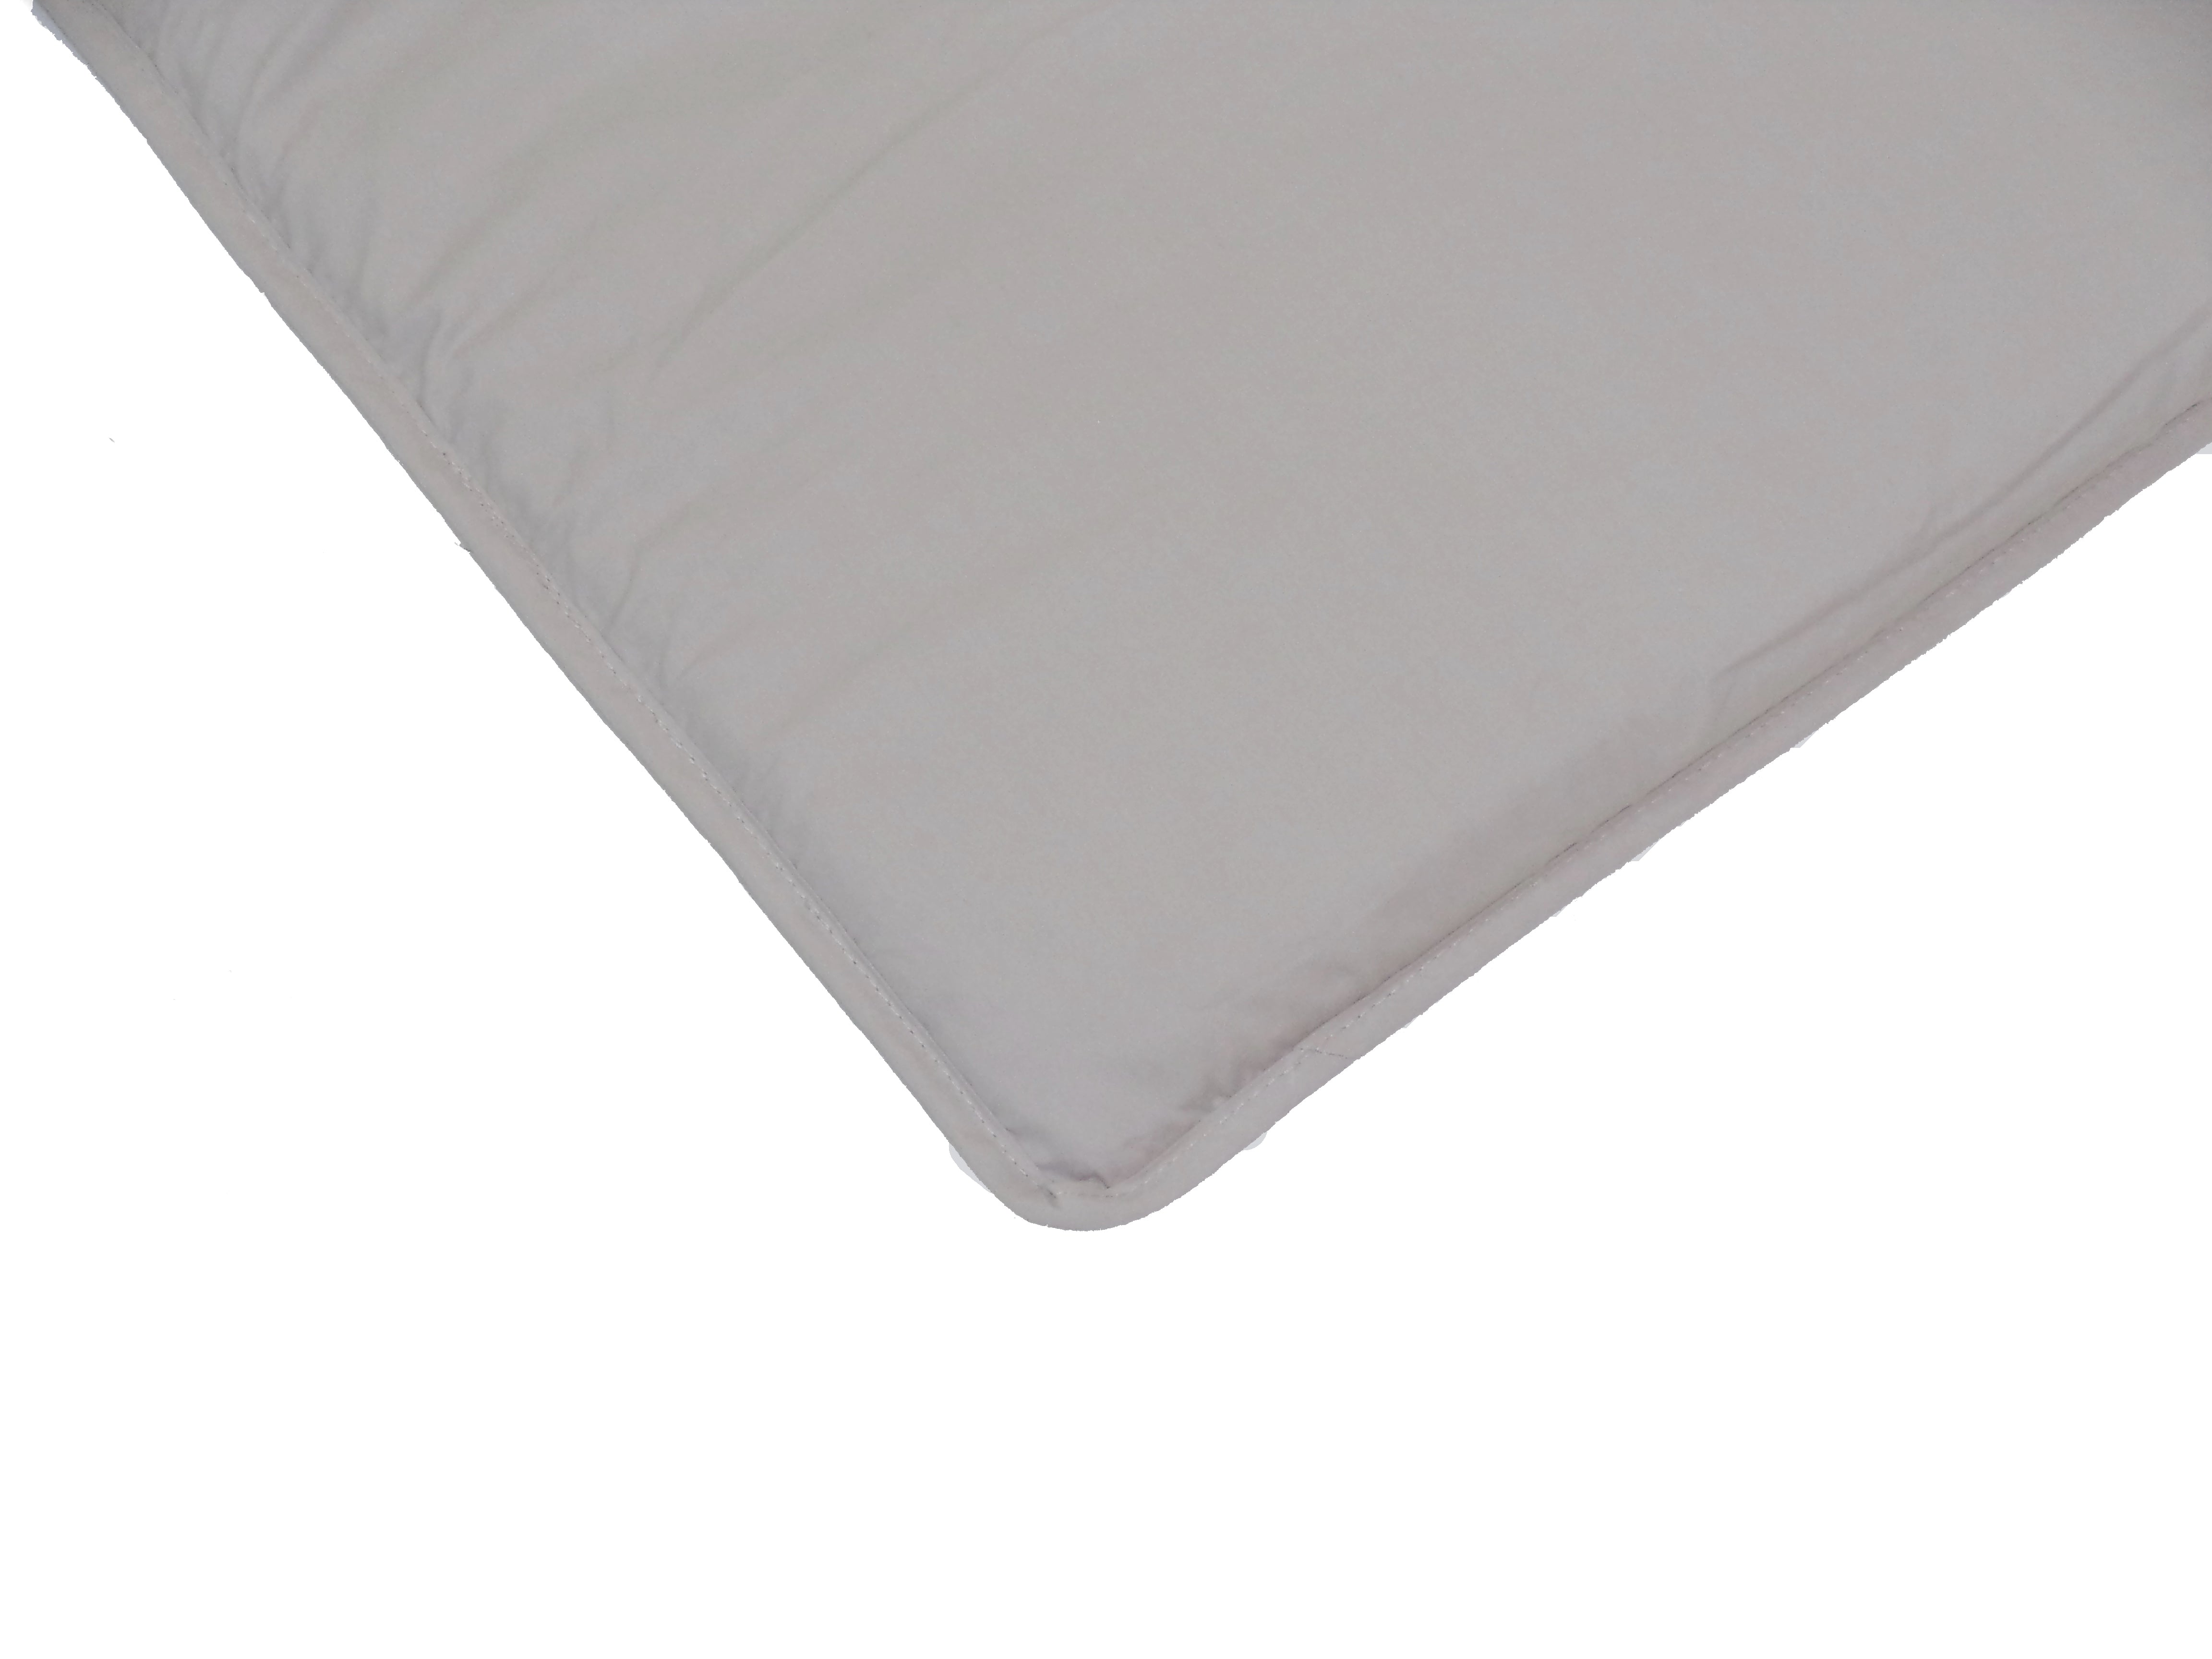 SHEETS FOR IDEAL CO-SLEEPER® - COTTON